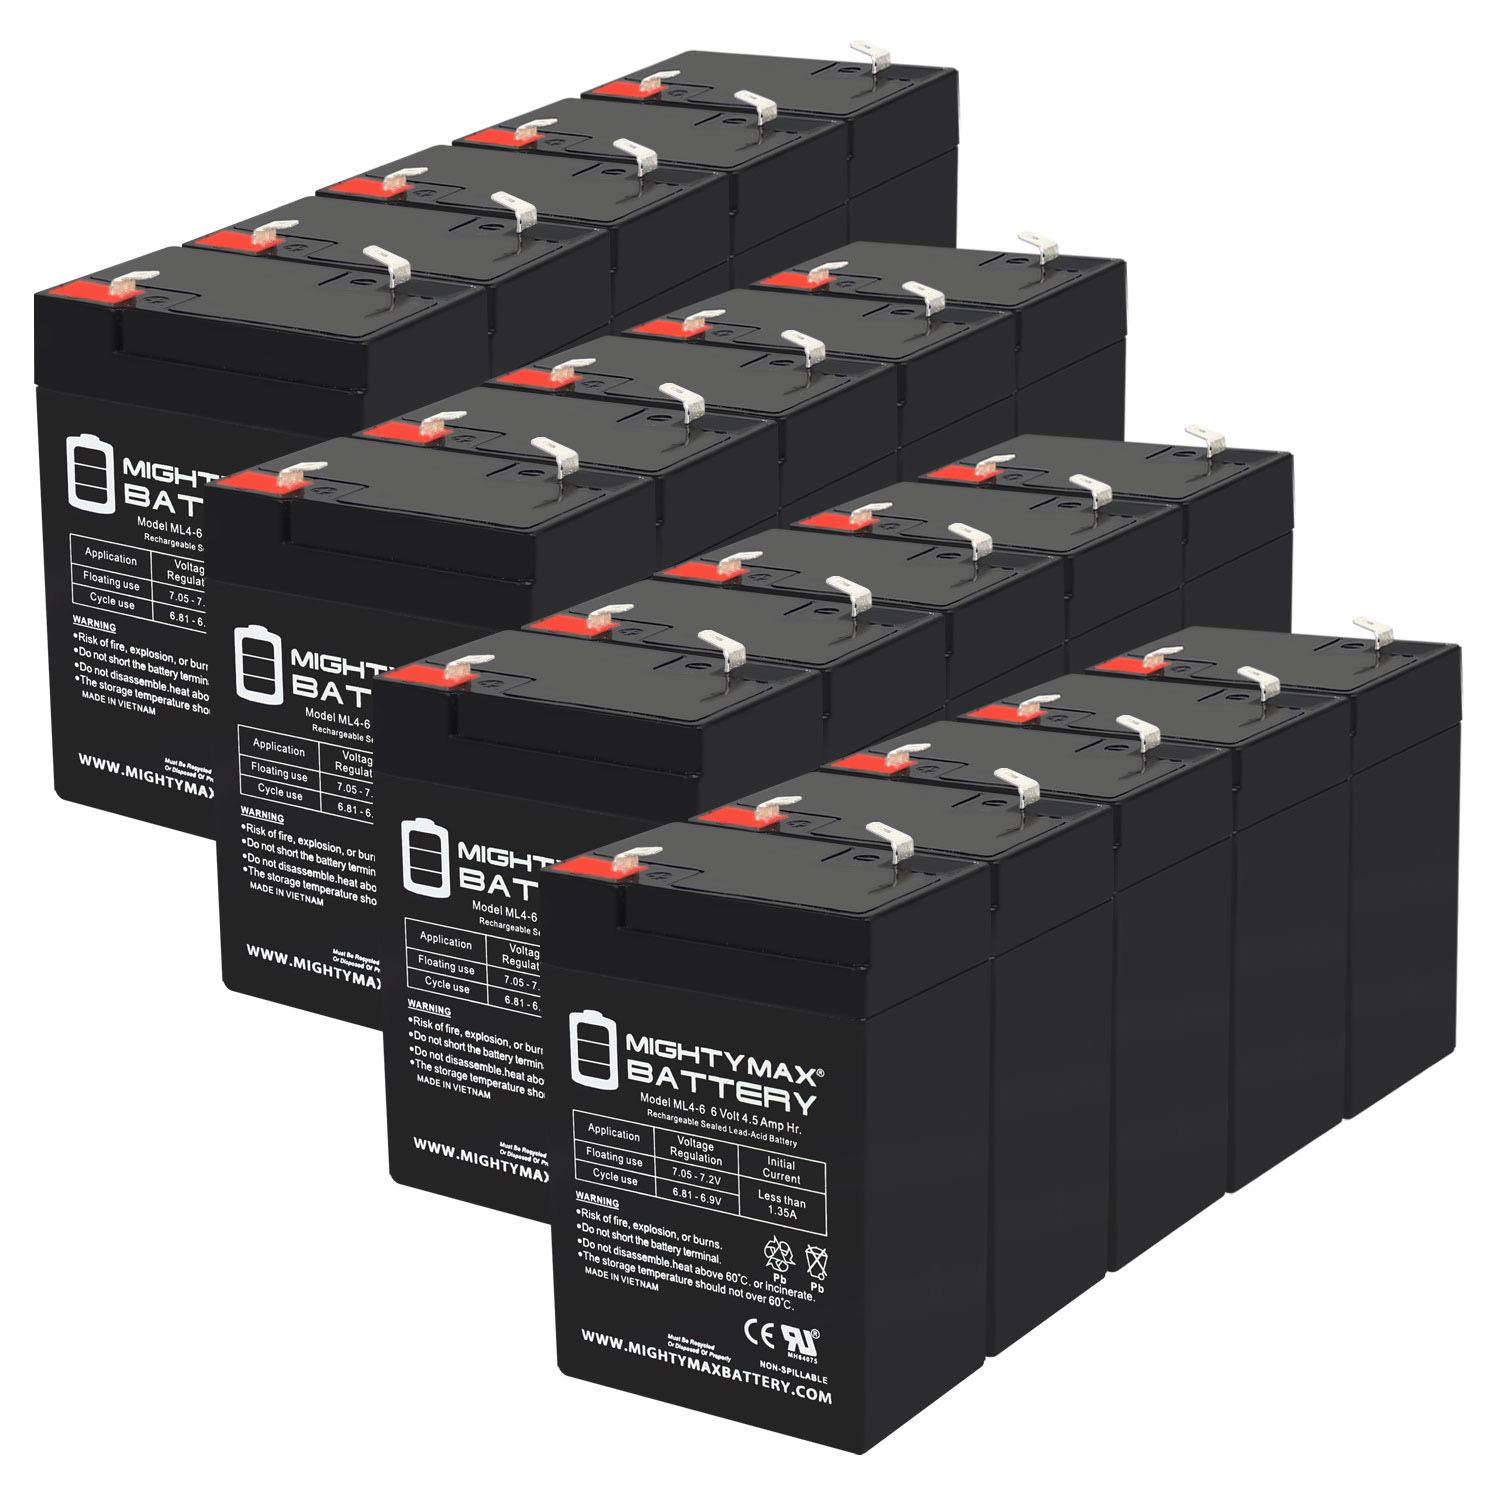 6V 4.5AH SLA Replacement Battery for Chloride 1000010148 - 20 Pack